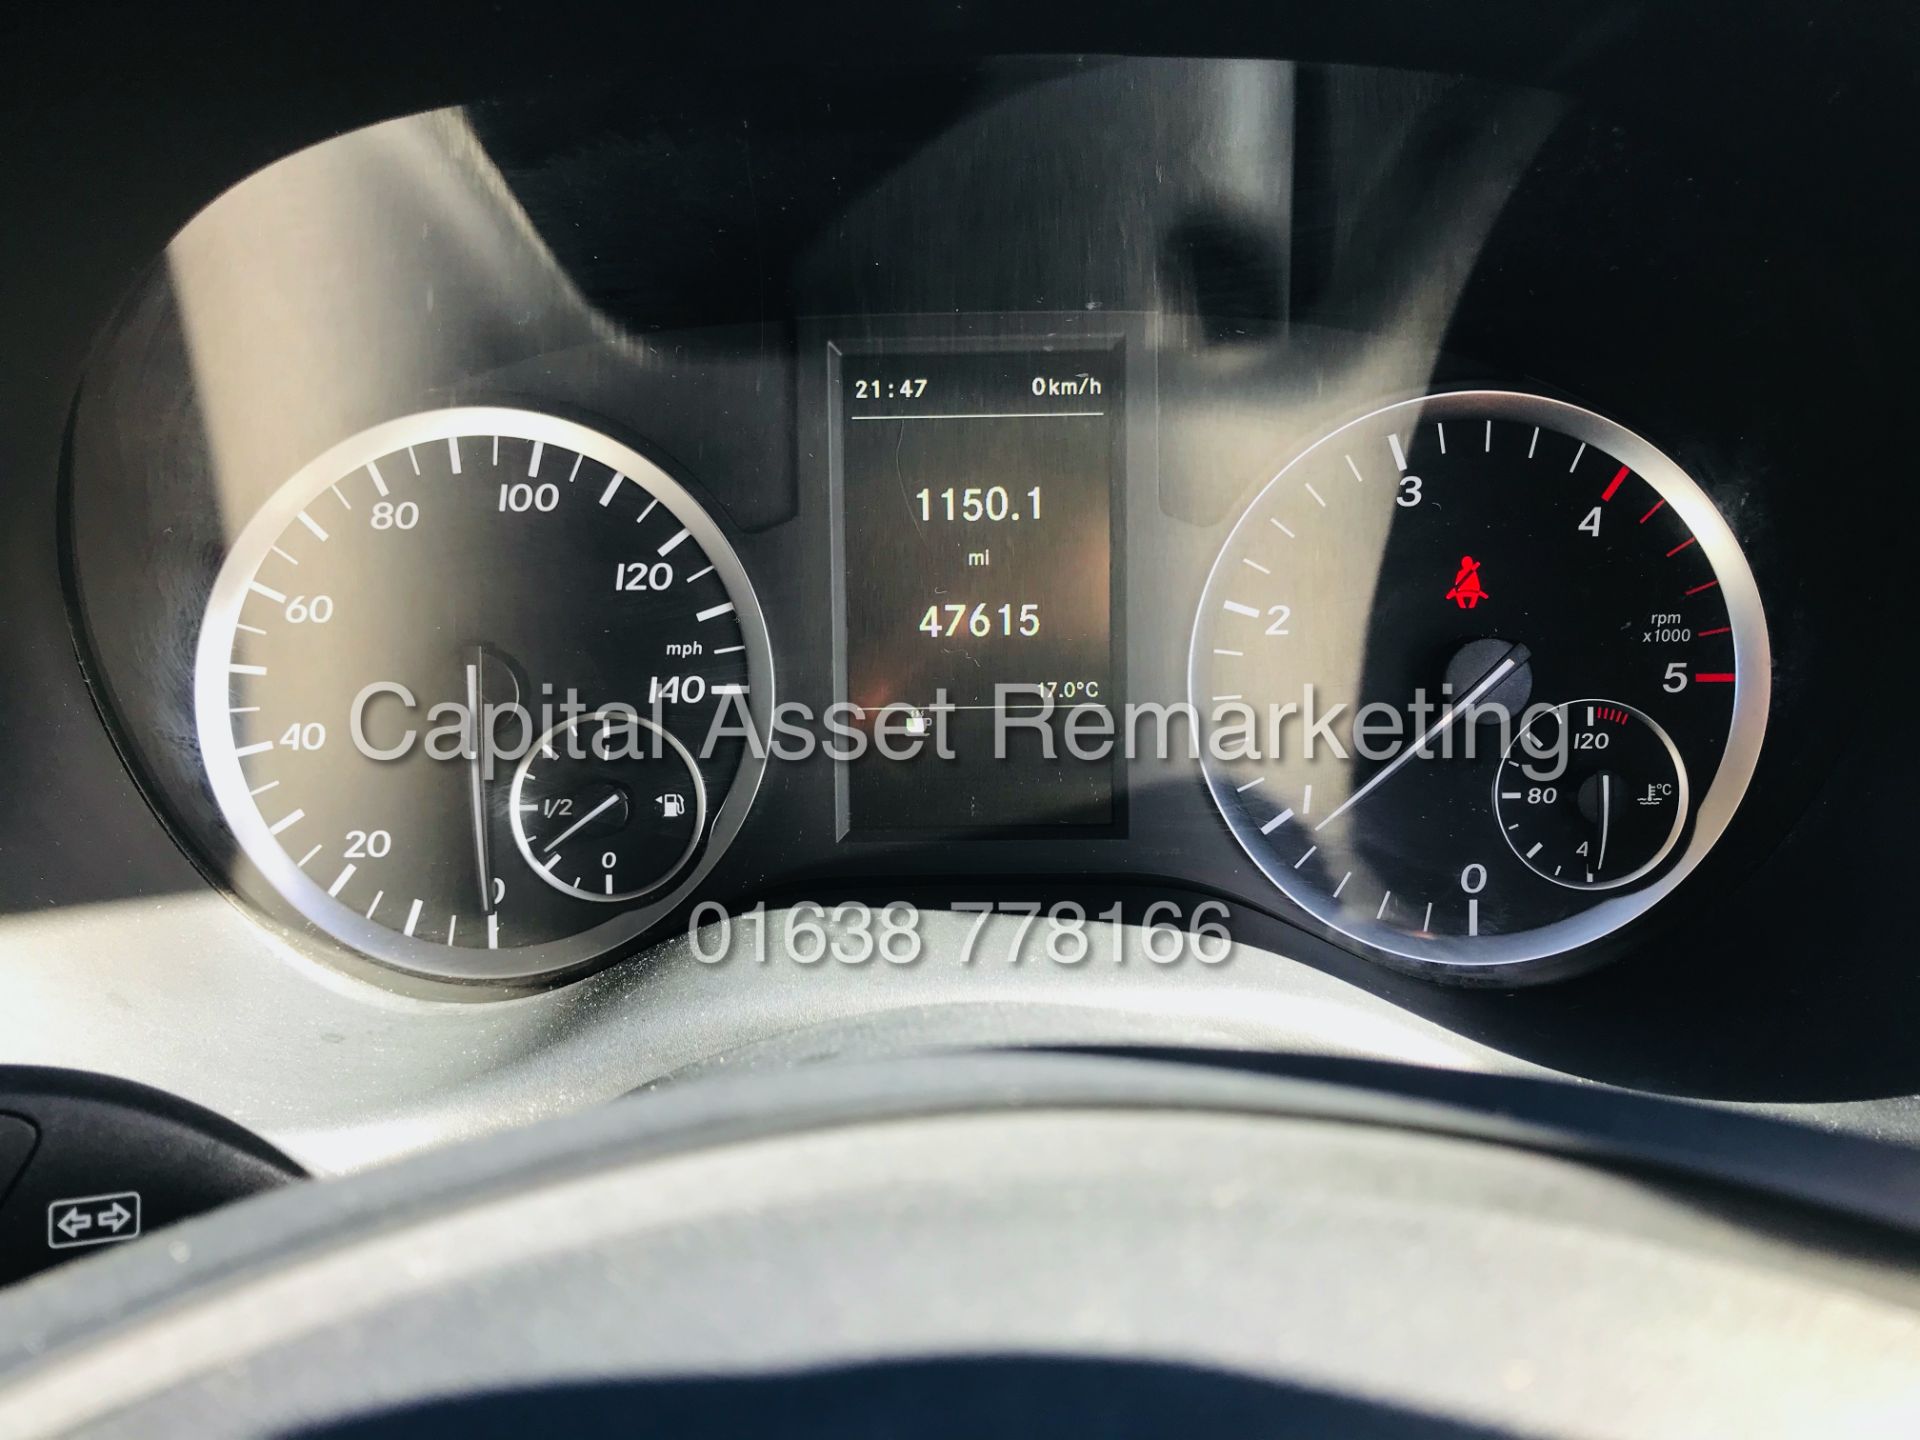 (On Sale) MERCEDES VITO 109CDI (17 REG) 1 OWNER - LOW MILEAGE WITH FSH *EURO 6 / ULEZ COMPLIANT* - Image 16 of 24